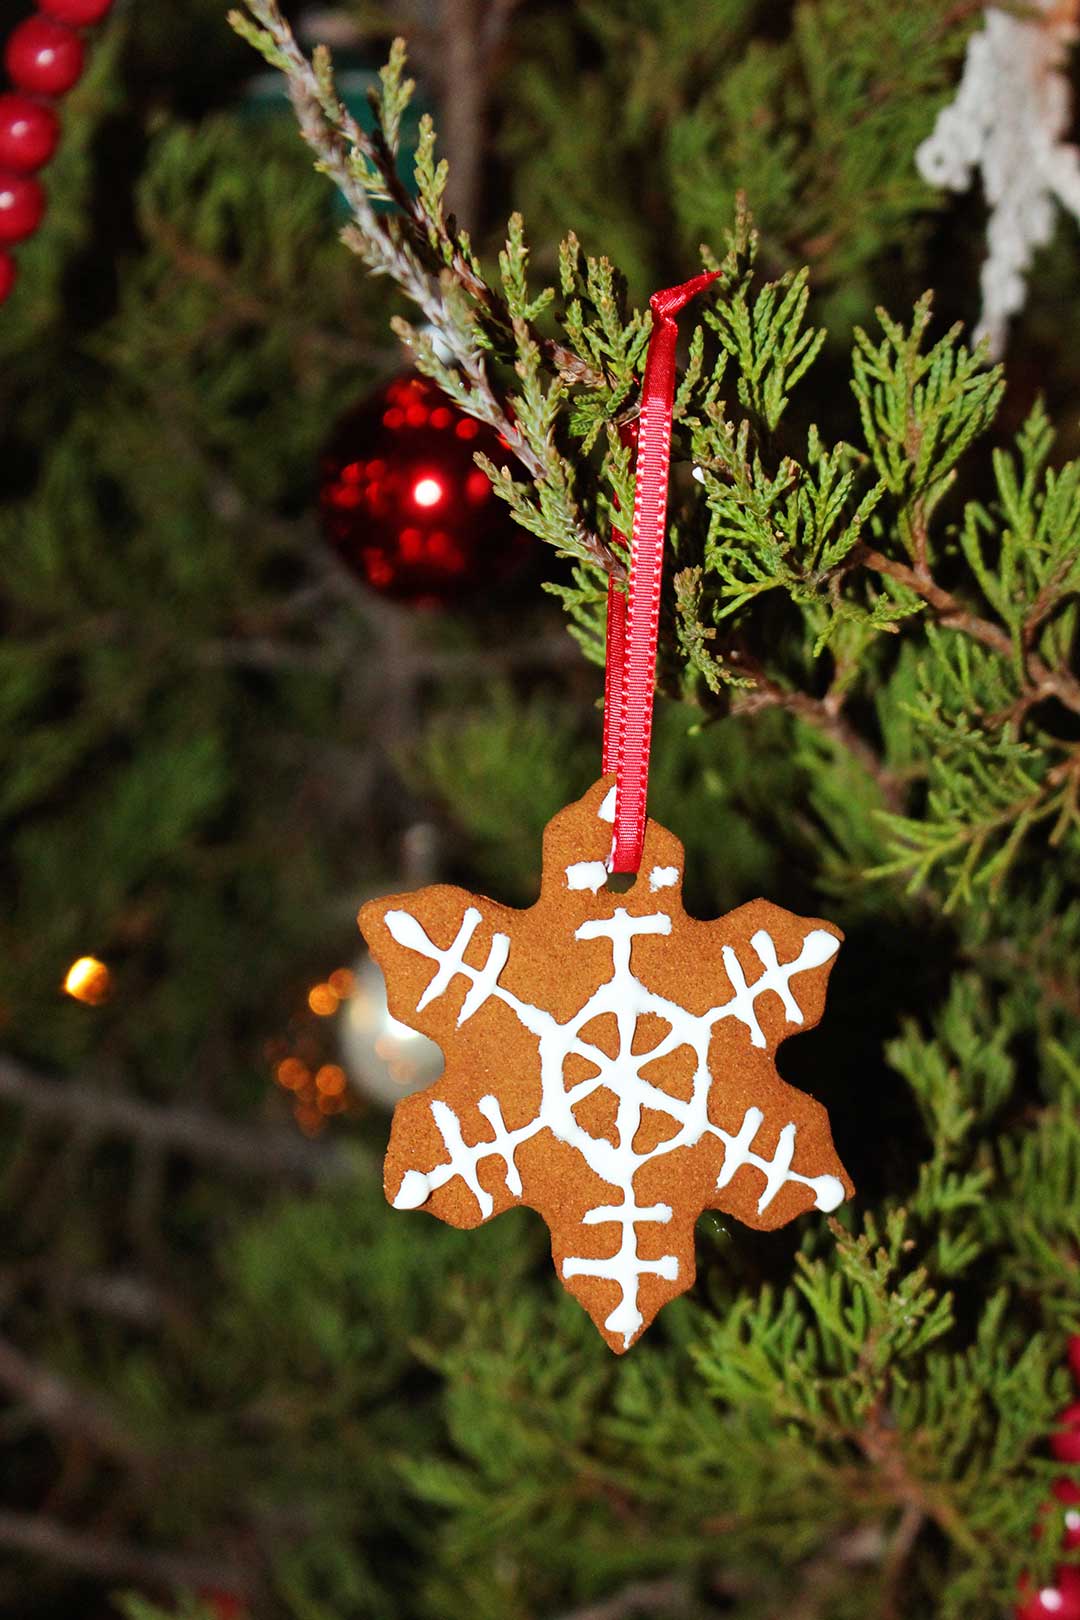 Completed snowflake shaped cinnamon applesauce ornament hanging from Christmas tree.